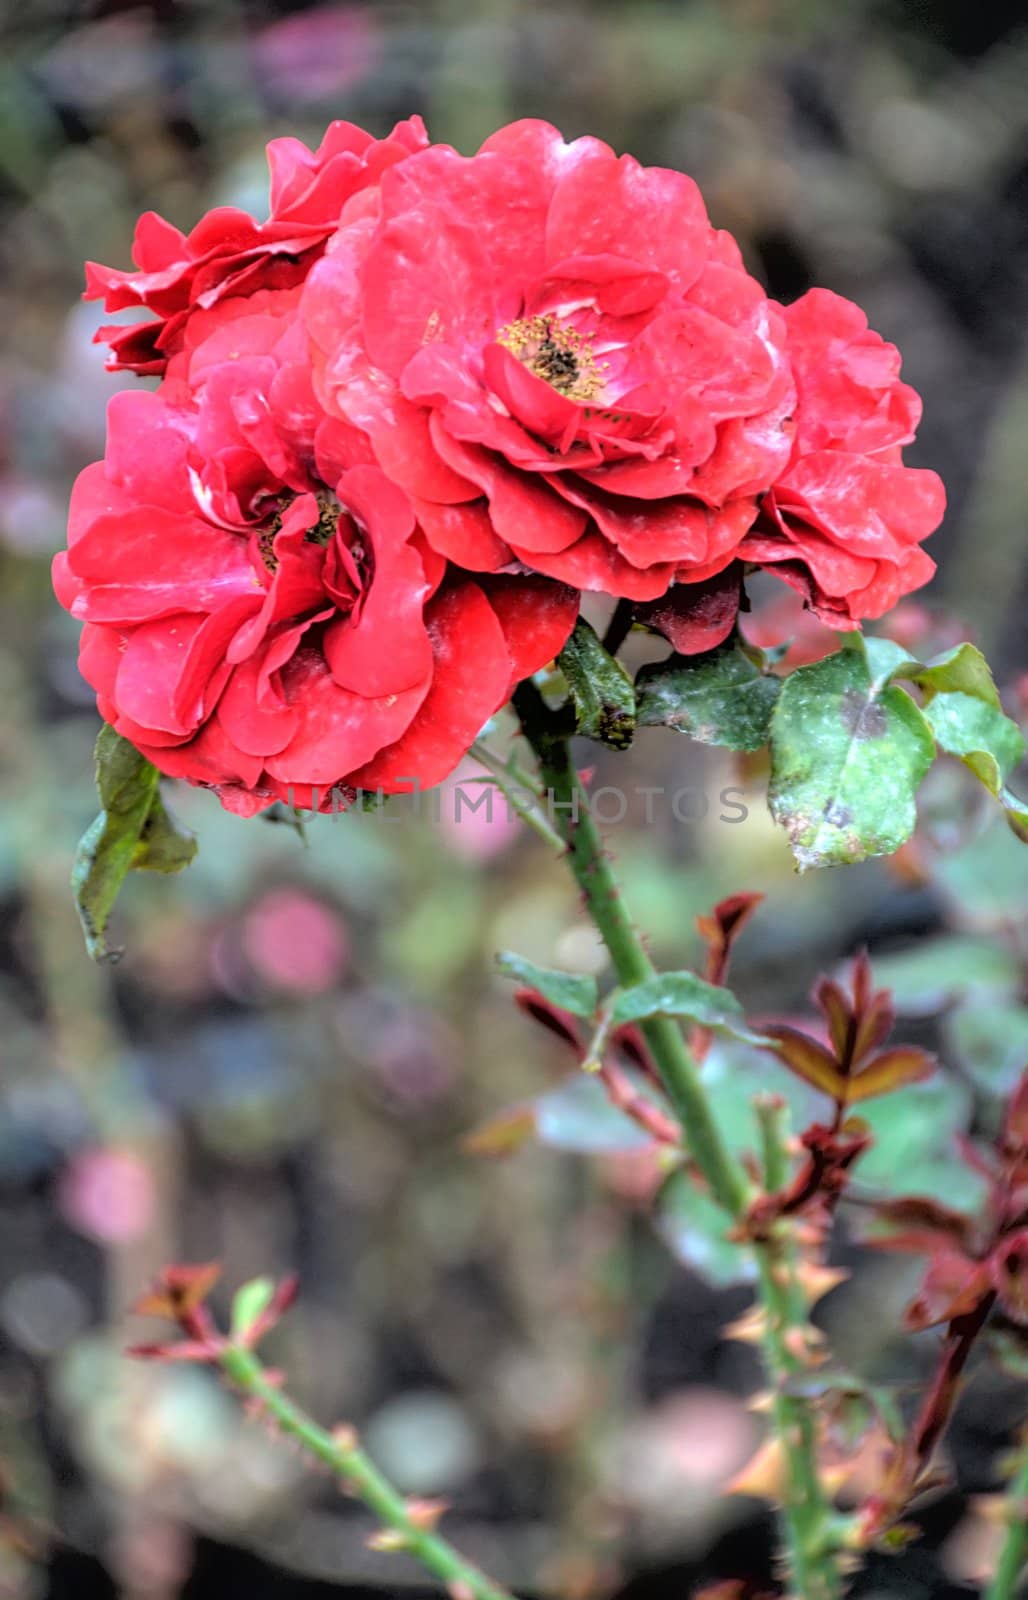 red flowers on blurred background by arnelsr